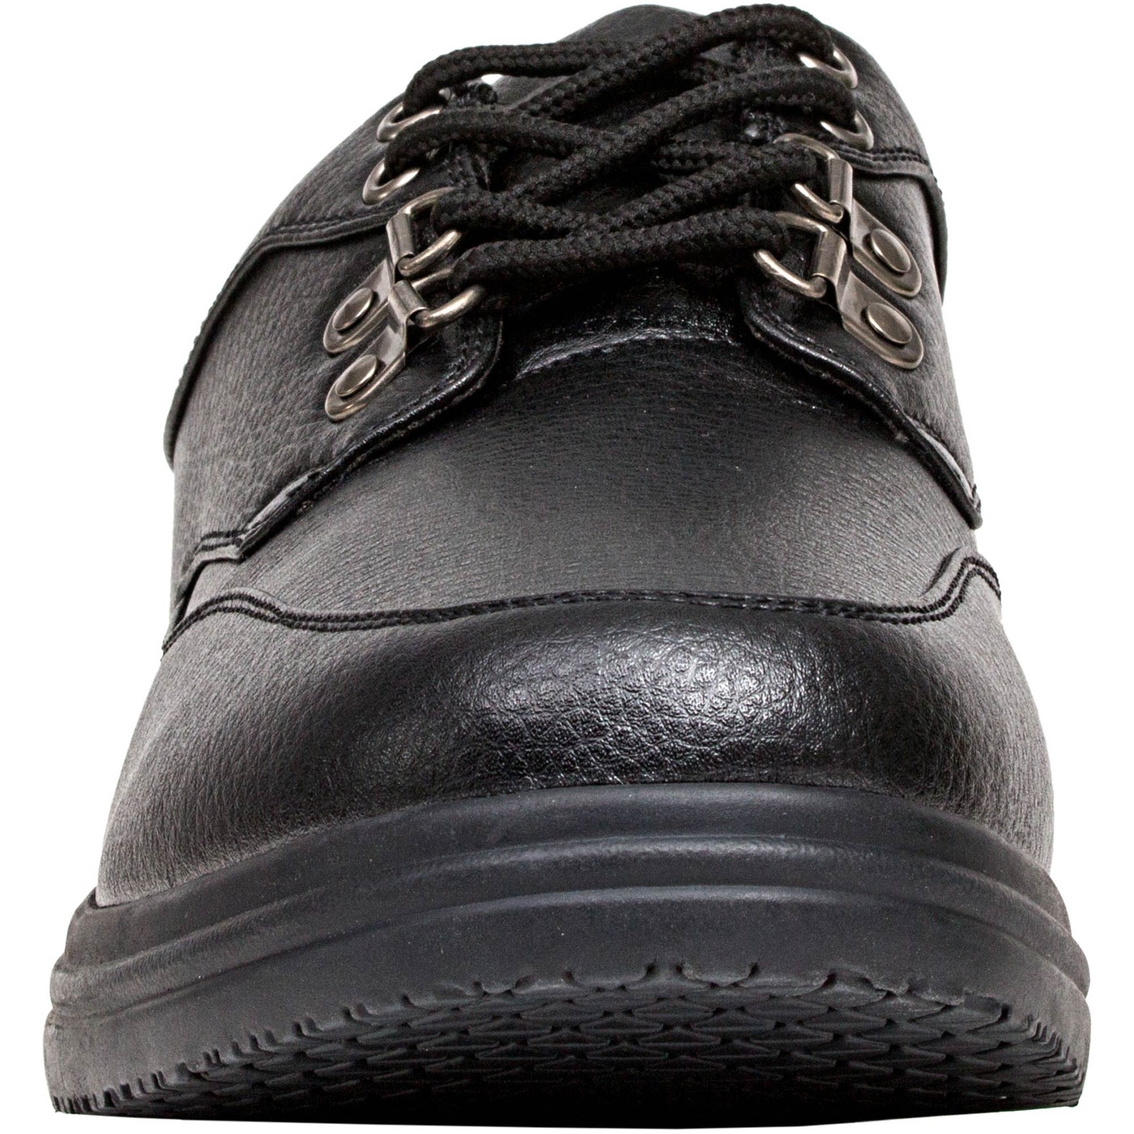 Deer Stags Porter Lace Up Oxford Shoes - Image 3 of 4